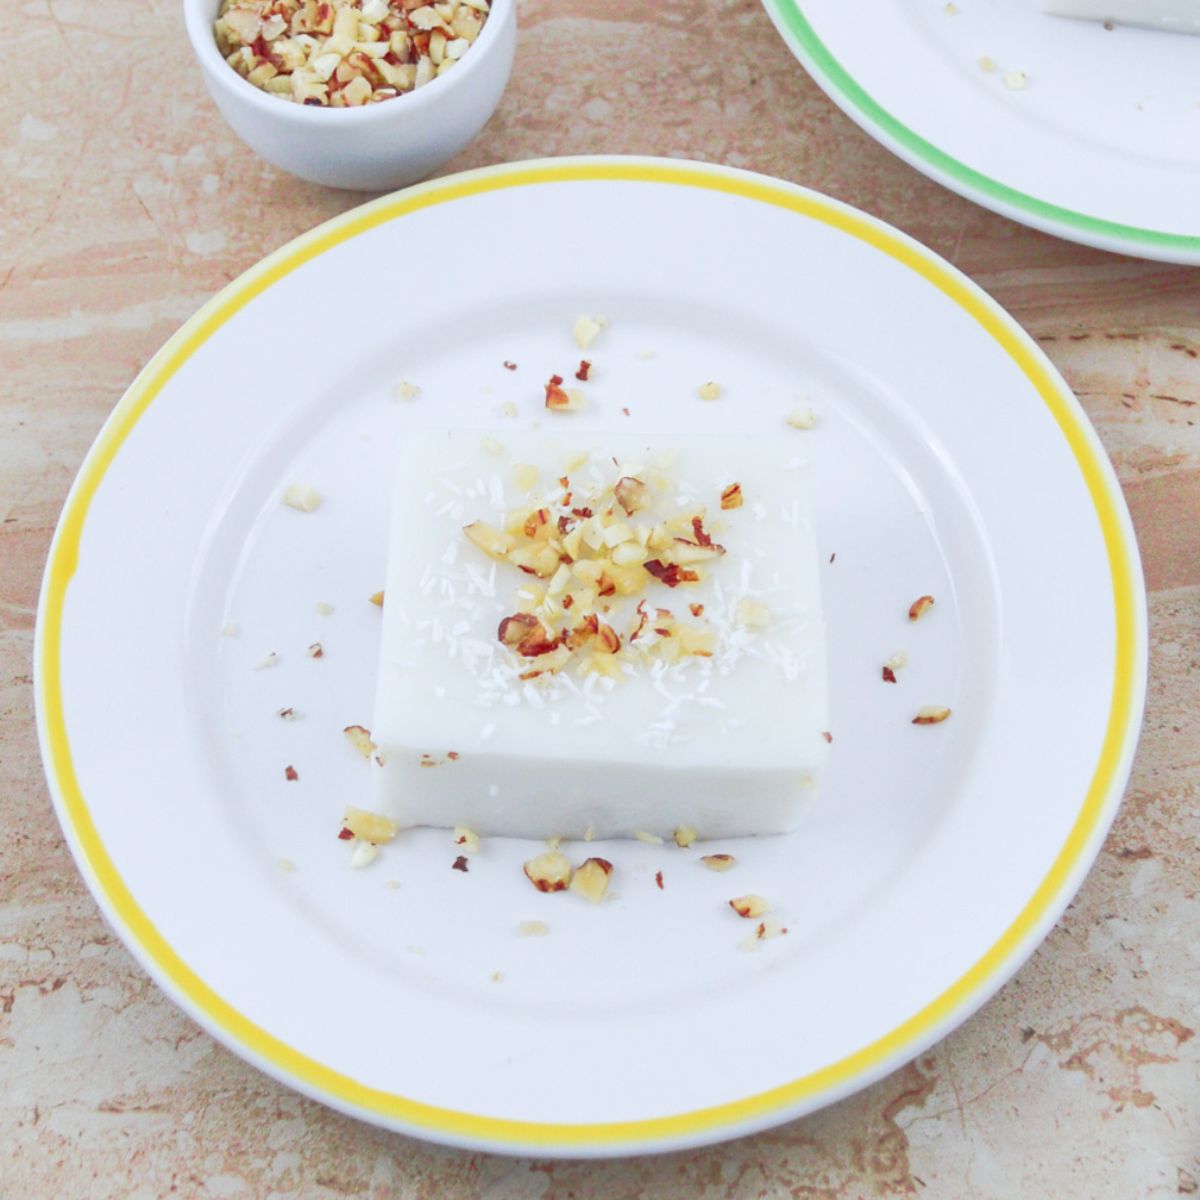 coconut pudding topped with chopped walnuts on plate placed on a table.